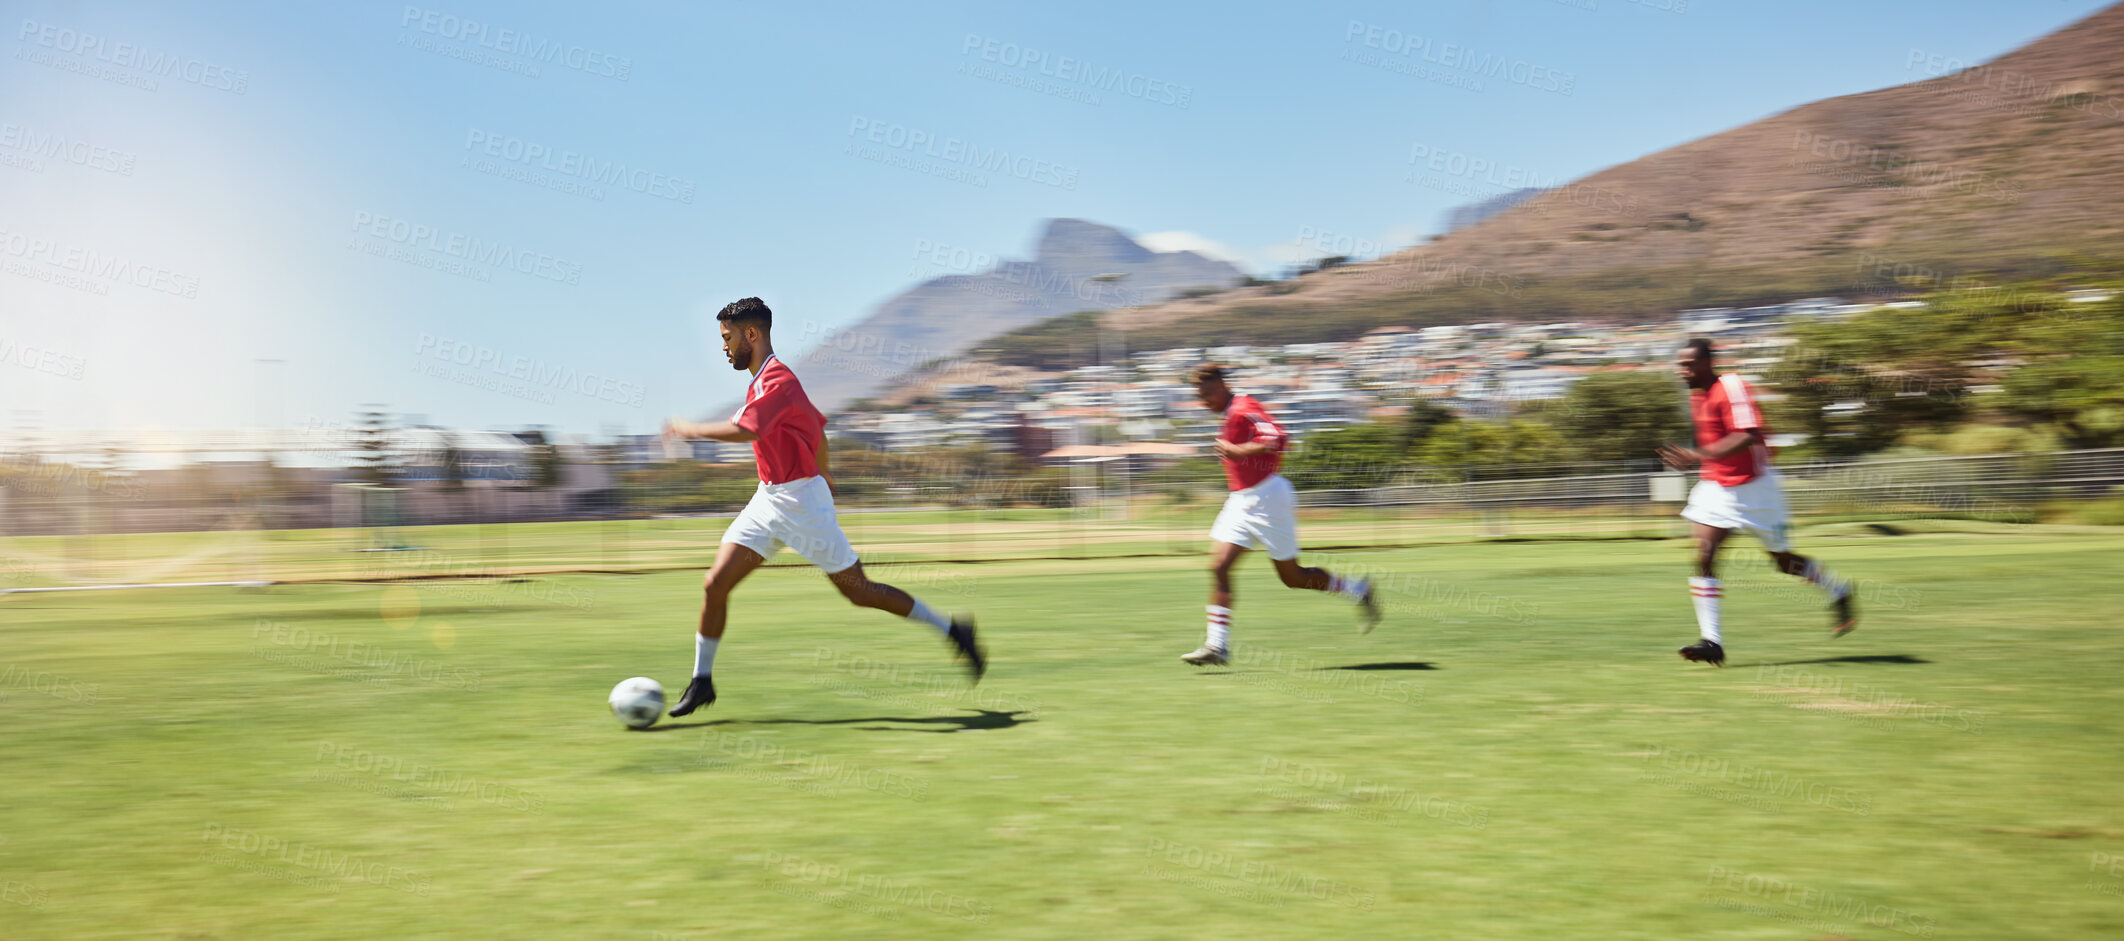 Buy stock photo Soccer player, running and soccer ball team sports competition game, grass pitch and goals of winning score in South Africa. Motion blur professional athlete, football field action and outdoor energy